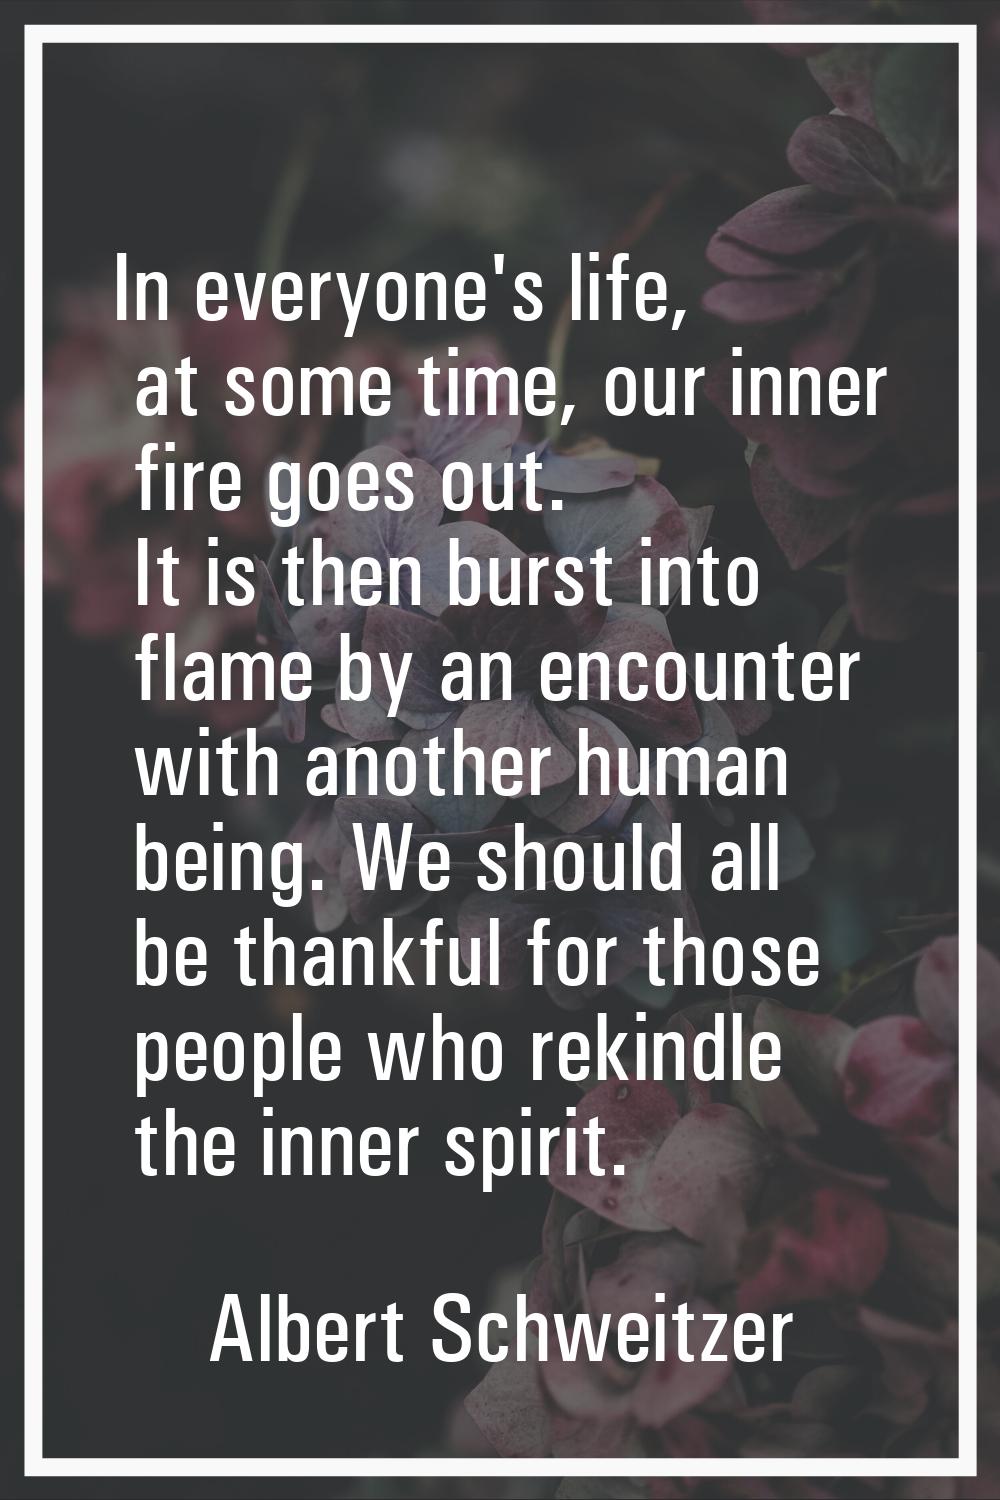 In everyone's life, at some time, our inner fire goes out. It is then burst into flame by an encoun